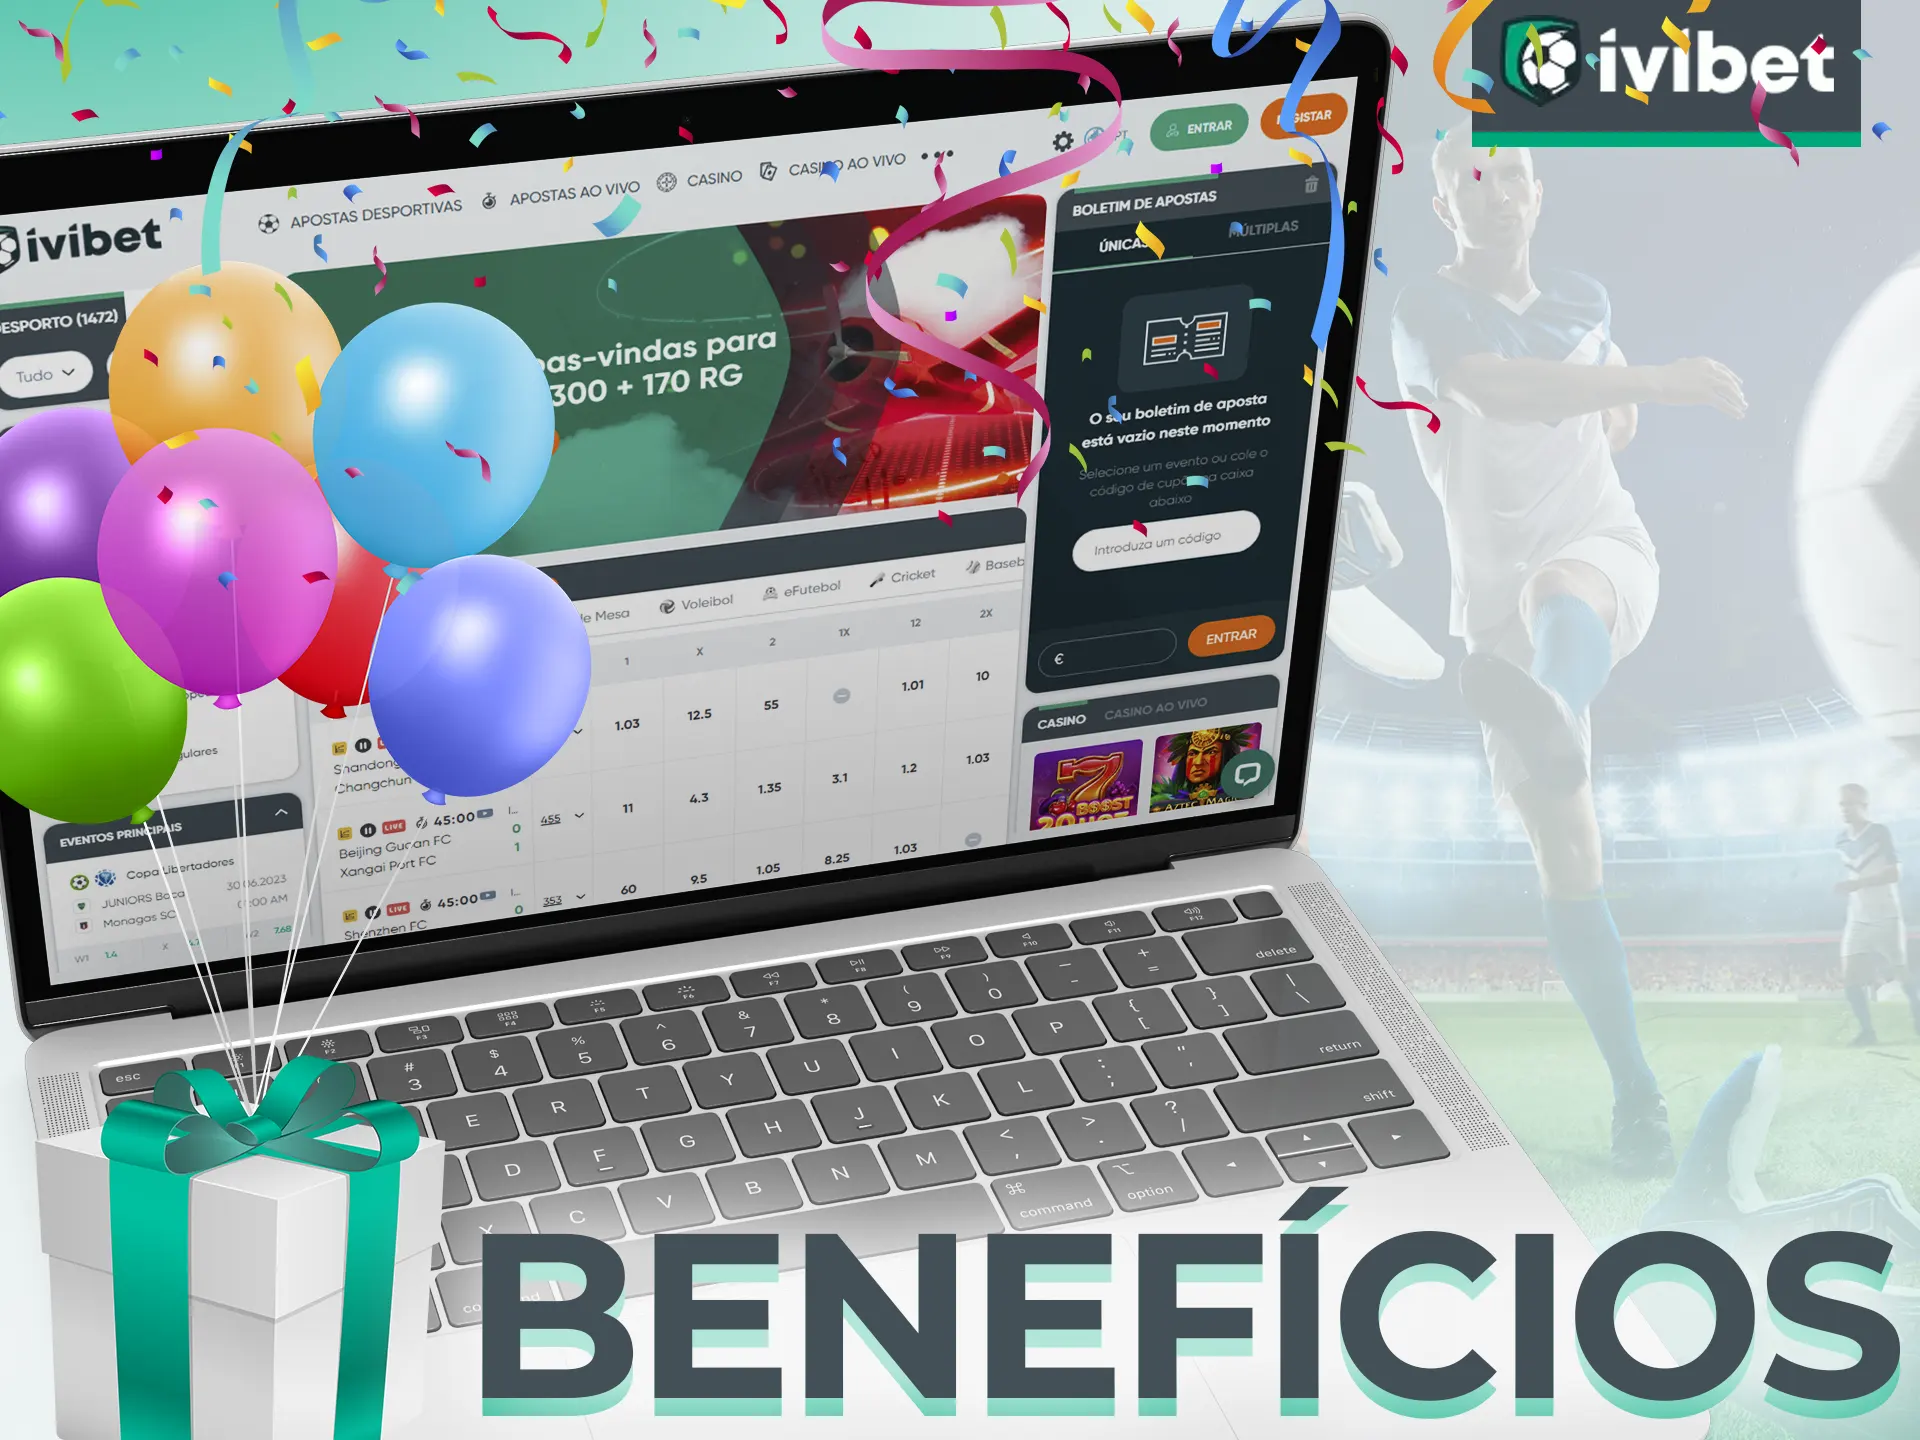 Ivibet has many bonuses and benefits for players